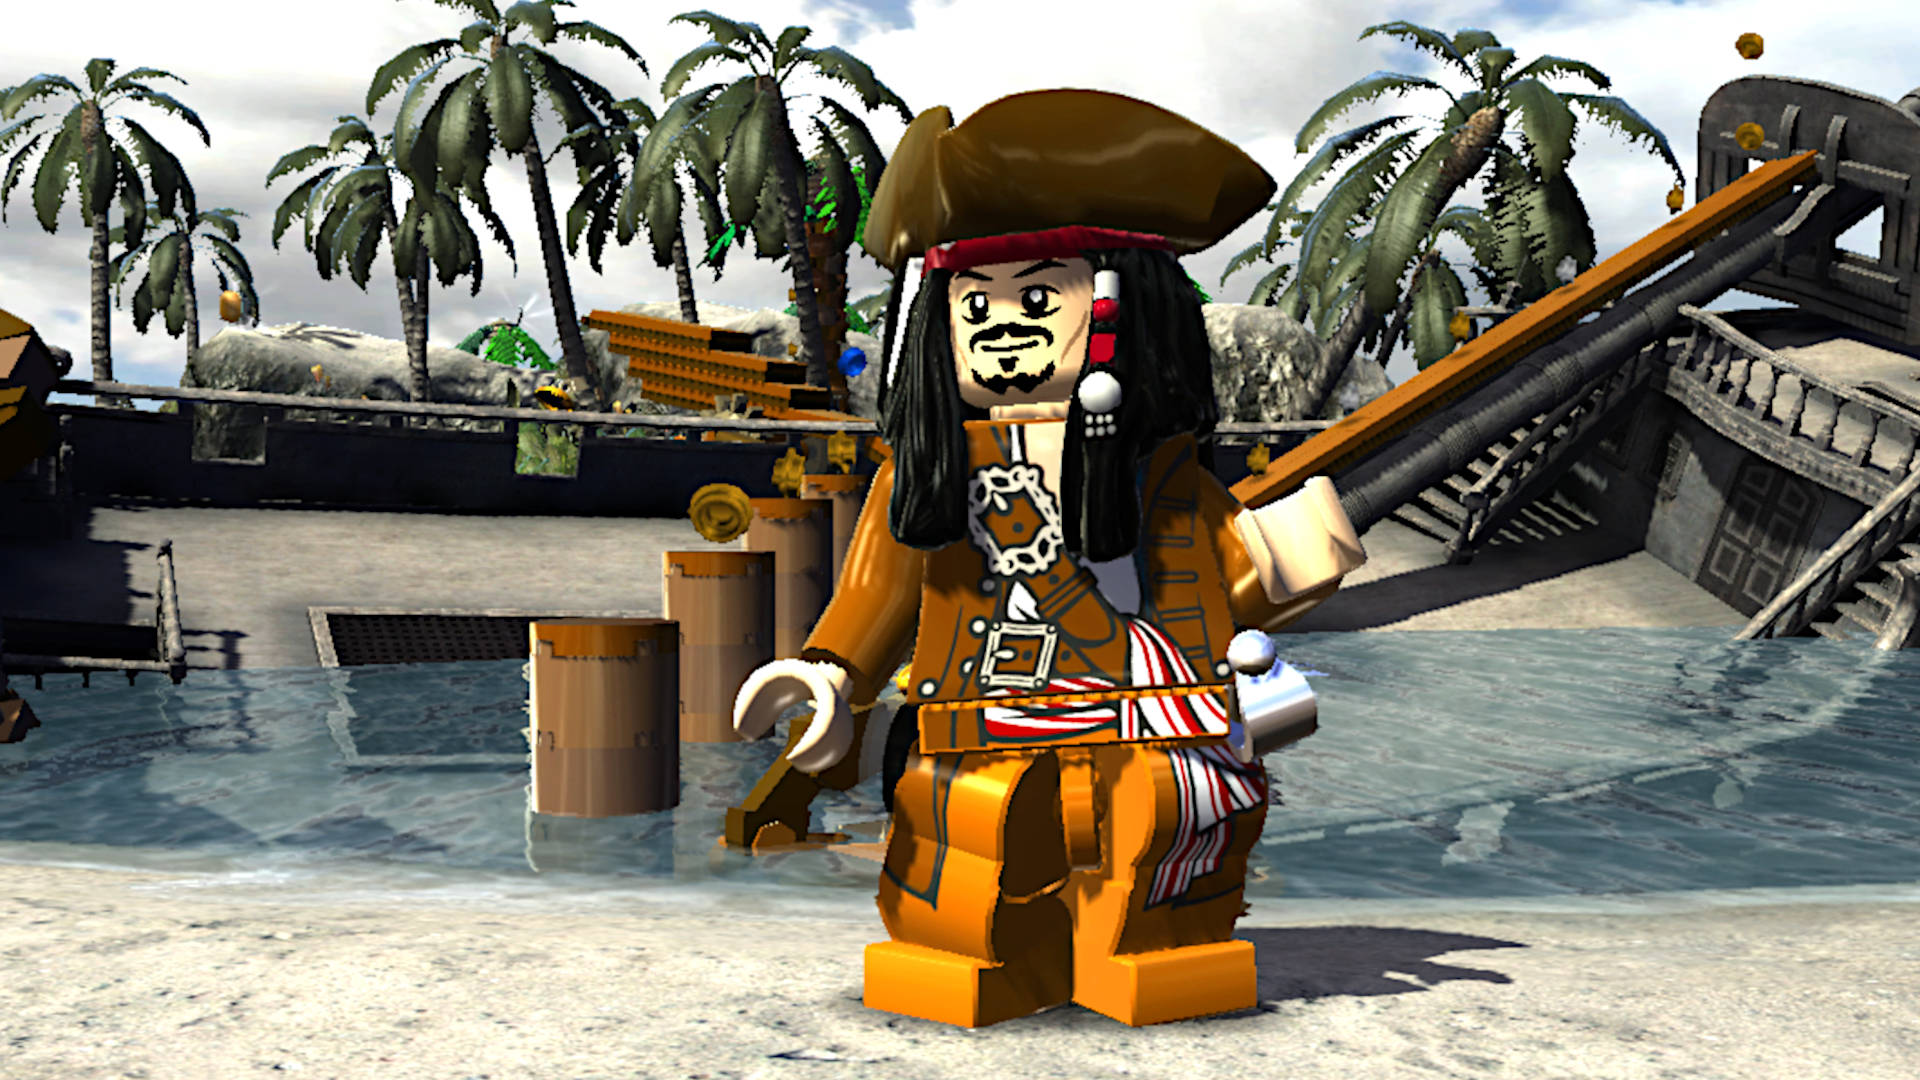 Best Pirate games: a Lego version of Captain Jack Sparrow, standing next to a sunken ship.